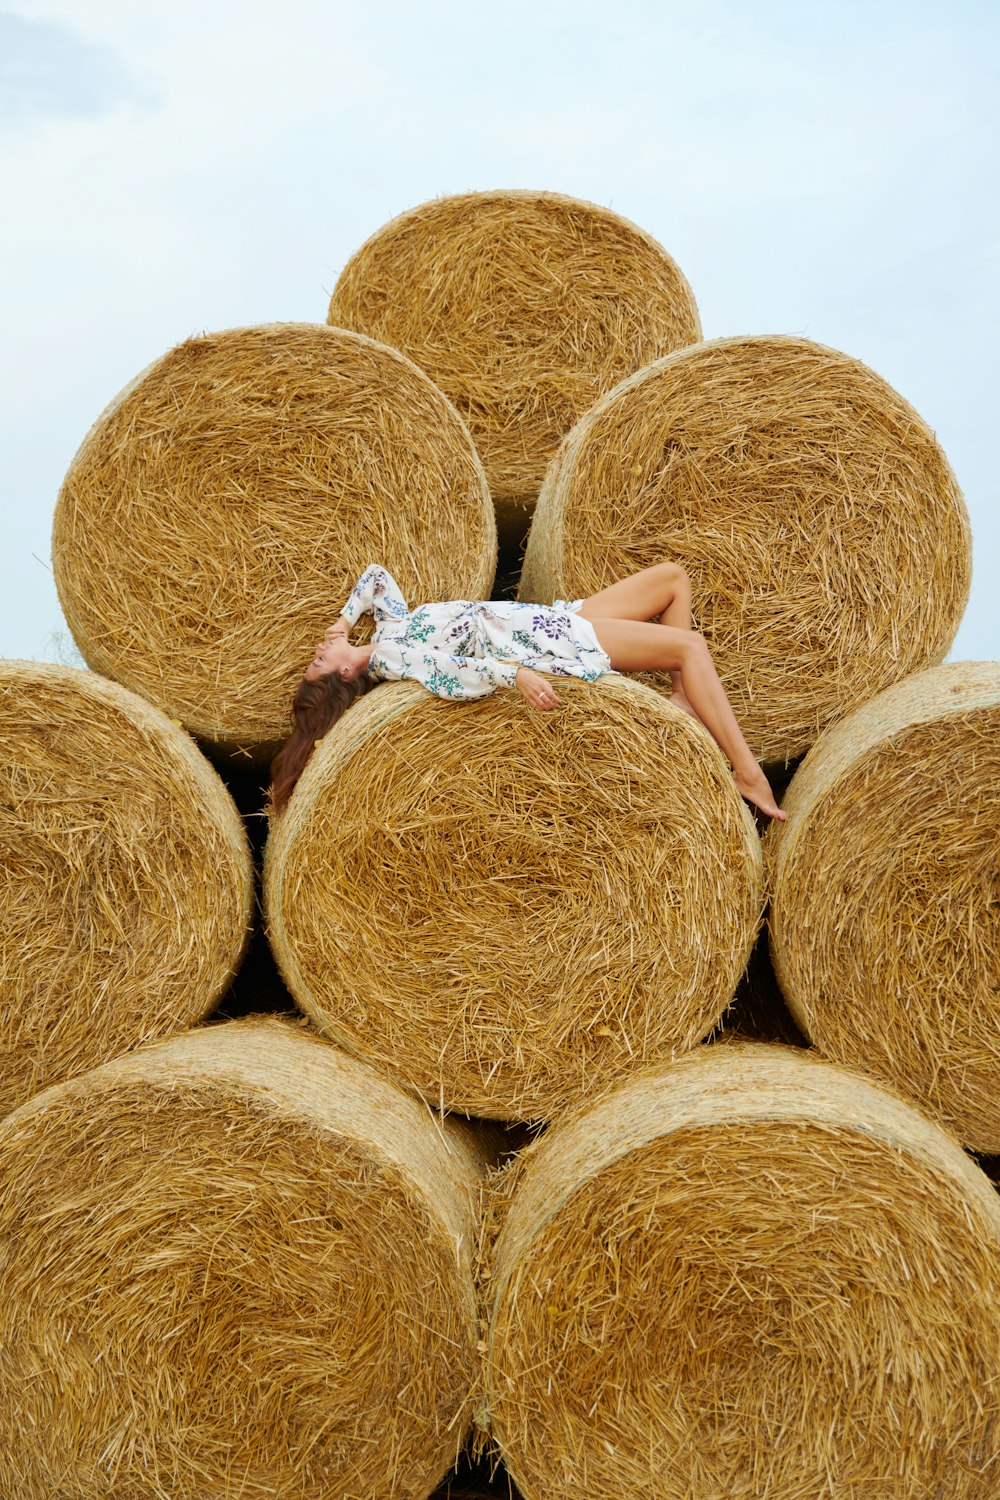 a baby lying on a pile of hay